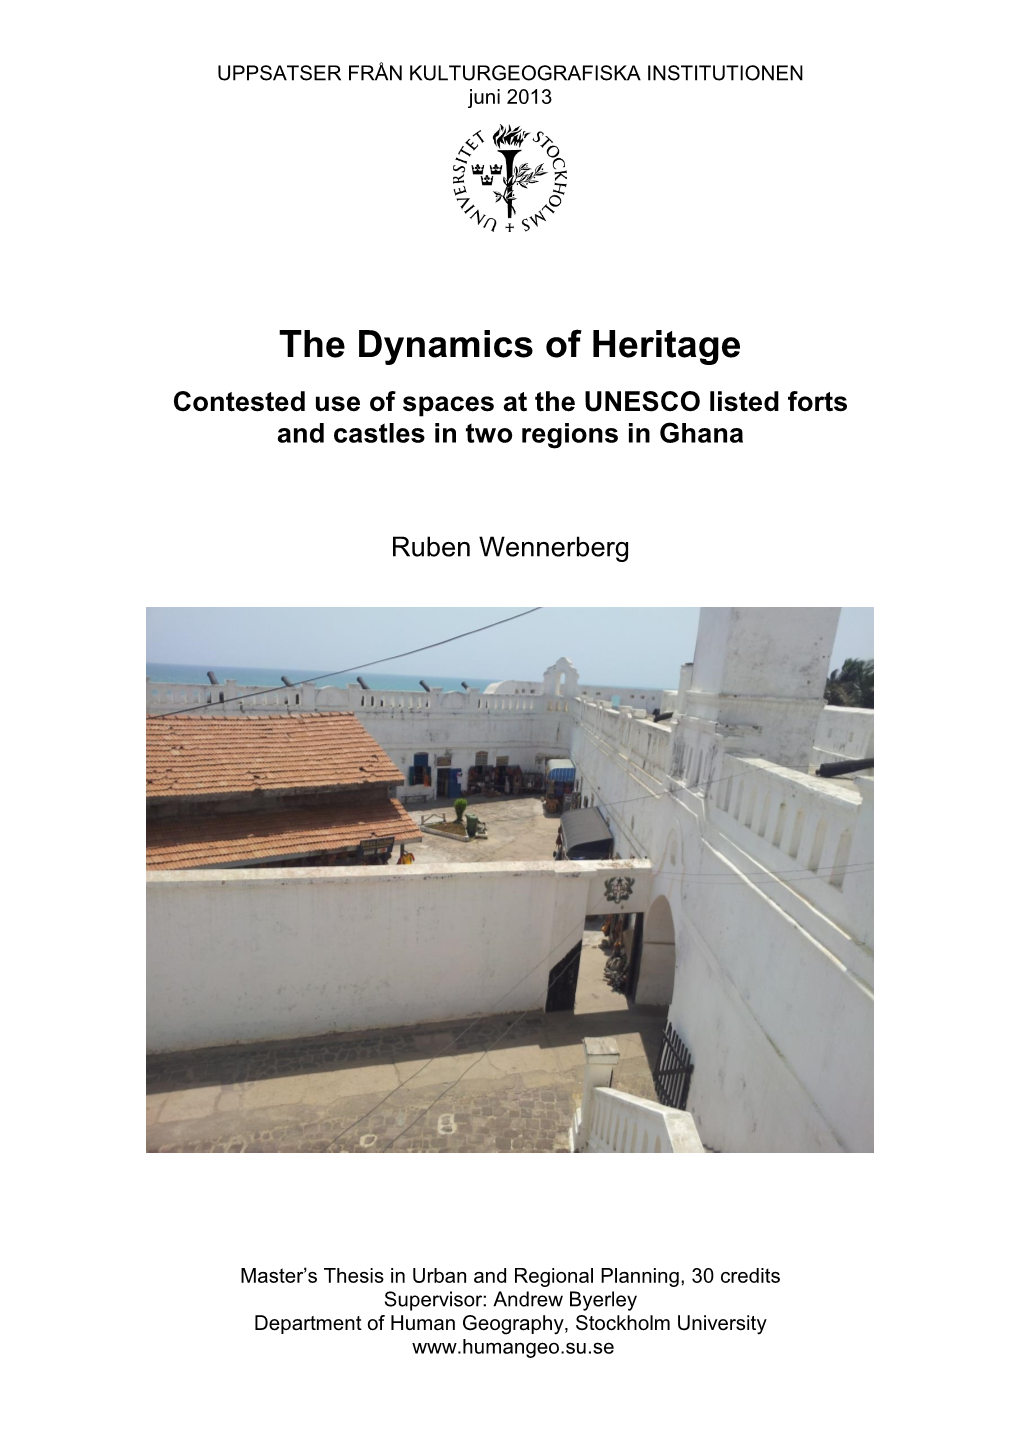 The Dynamics of Heritage Contested Use of Spaces at the UNESCO Listed Forts and Castles in Two Regions in Ghana